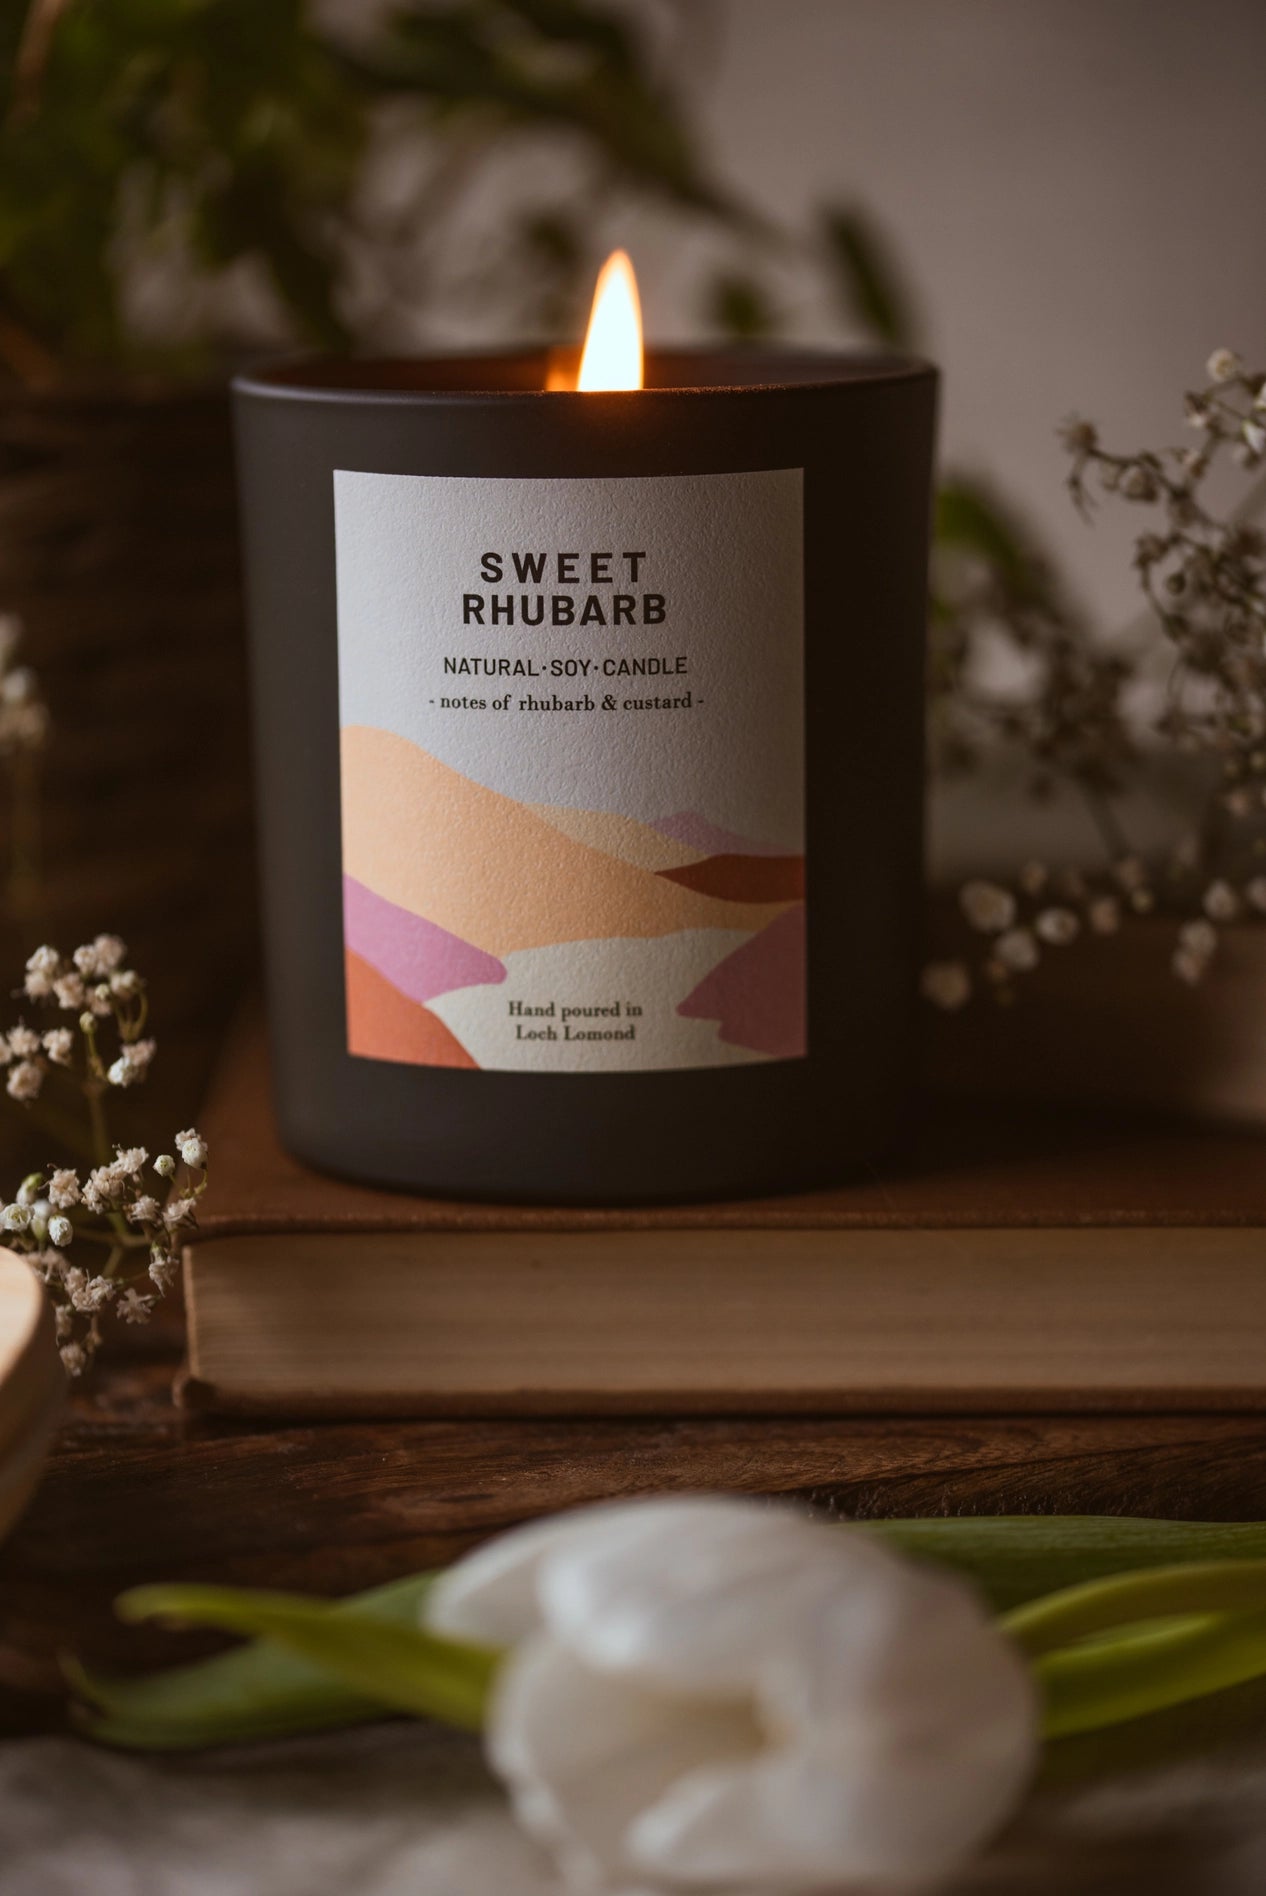 Burning Sweet Rhubarb scented candle surrounded by white flowers